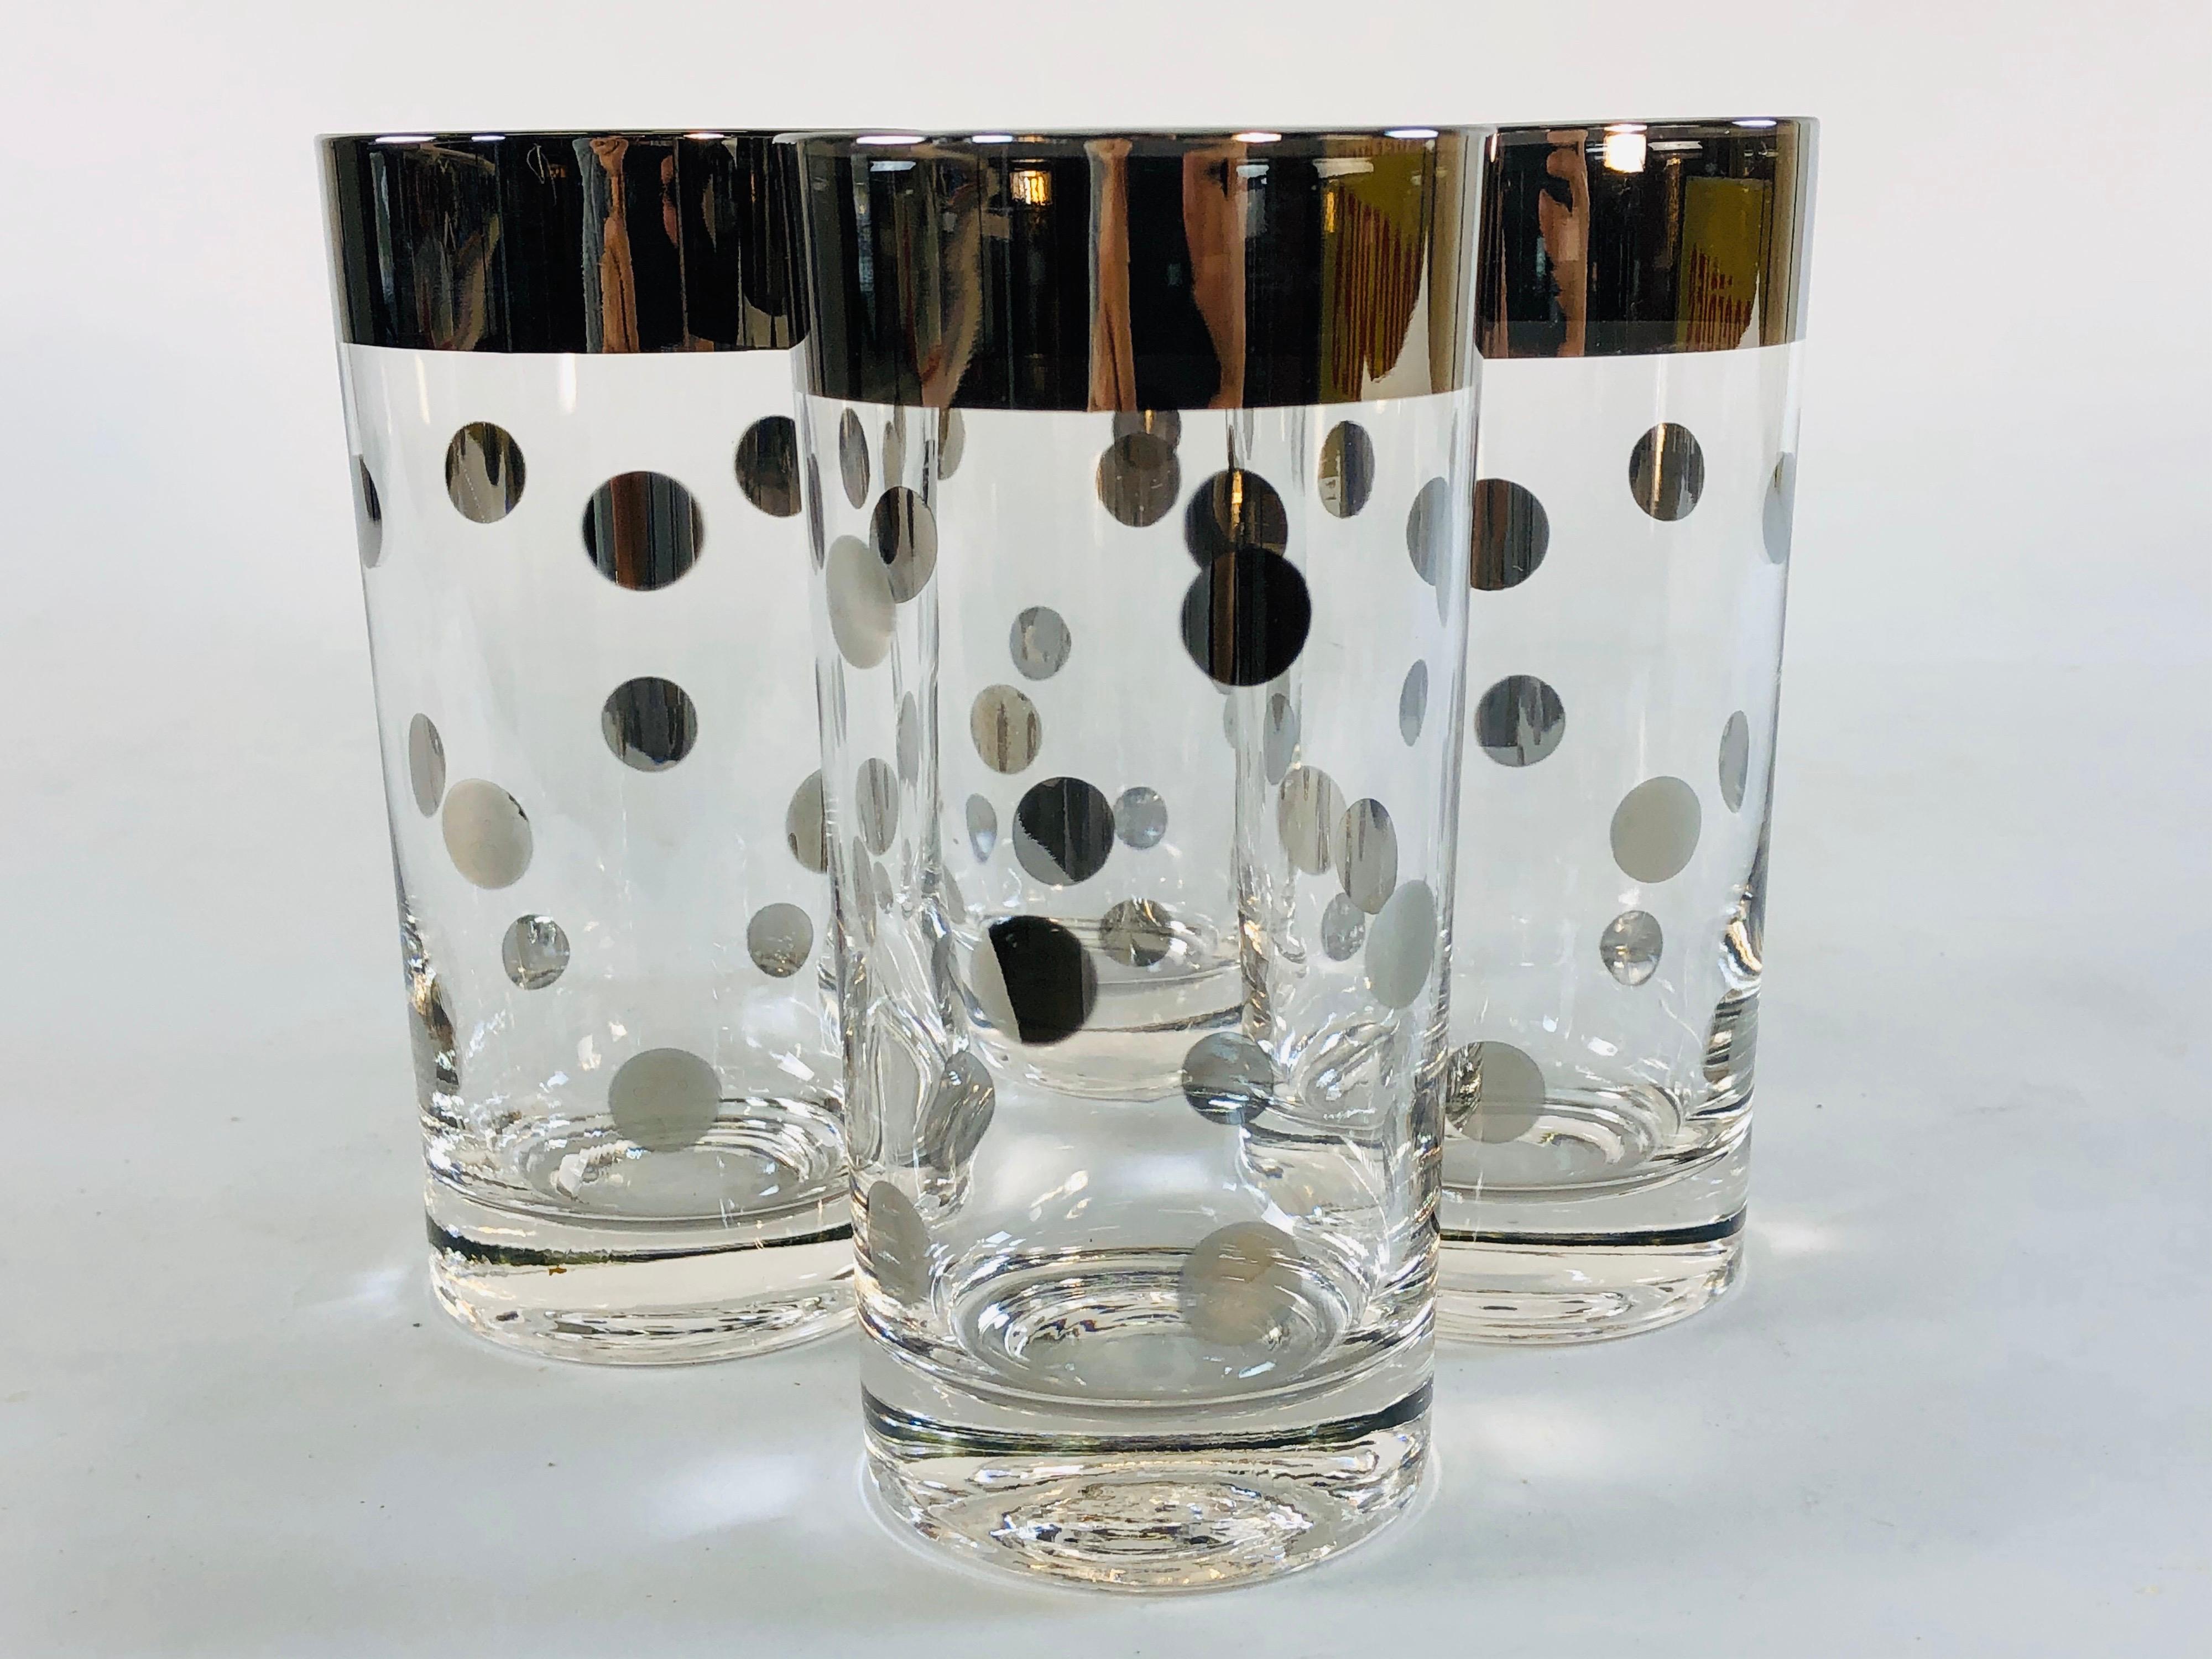 Vintage set of 4 silver rim and silver polka dot glass beverage tumblers. Excellent condition. No marks.